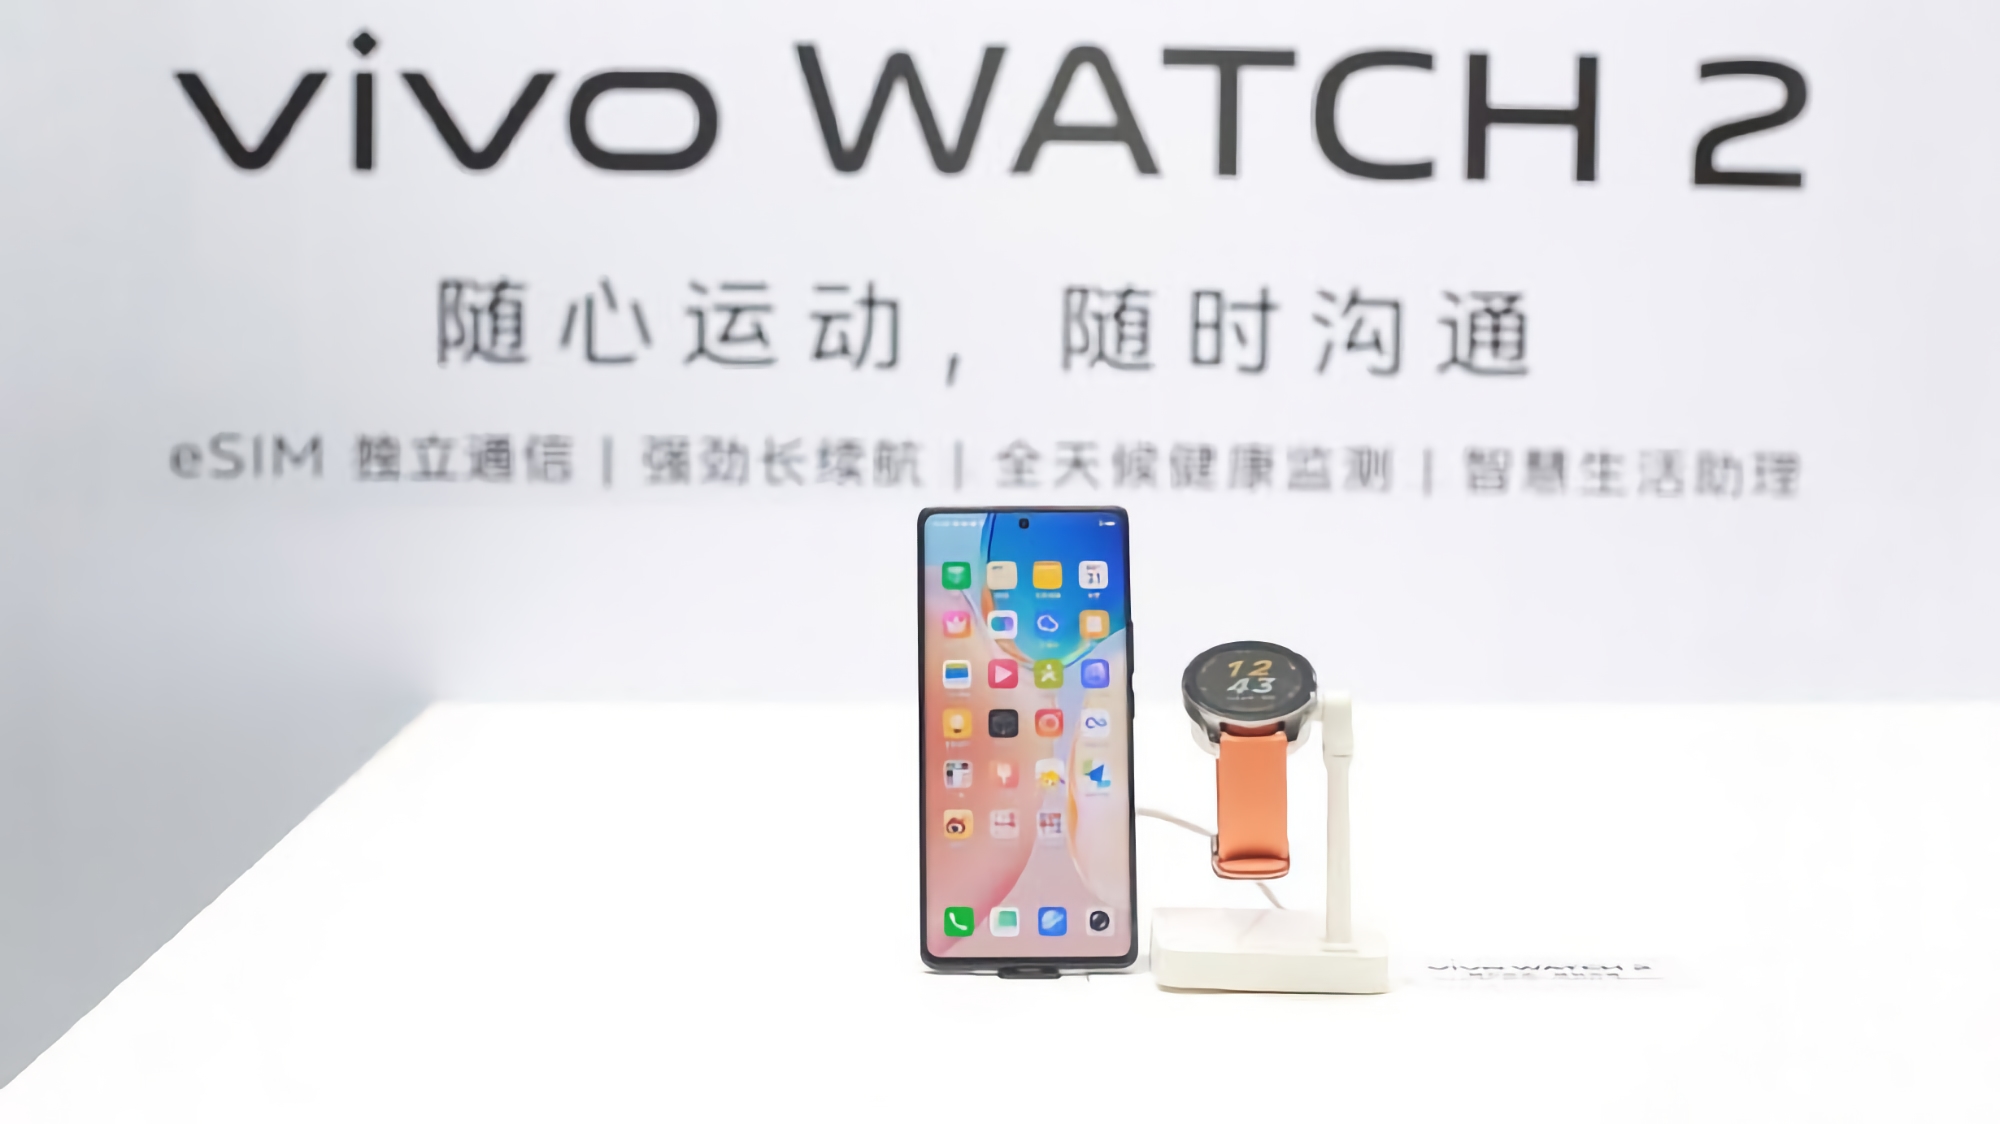 Without waiting for the announcement: Vivo showed a smart watch Vivo Watch 2 with eSIM support